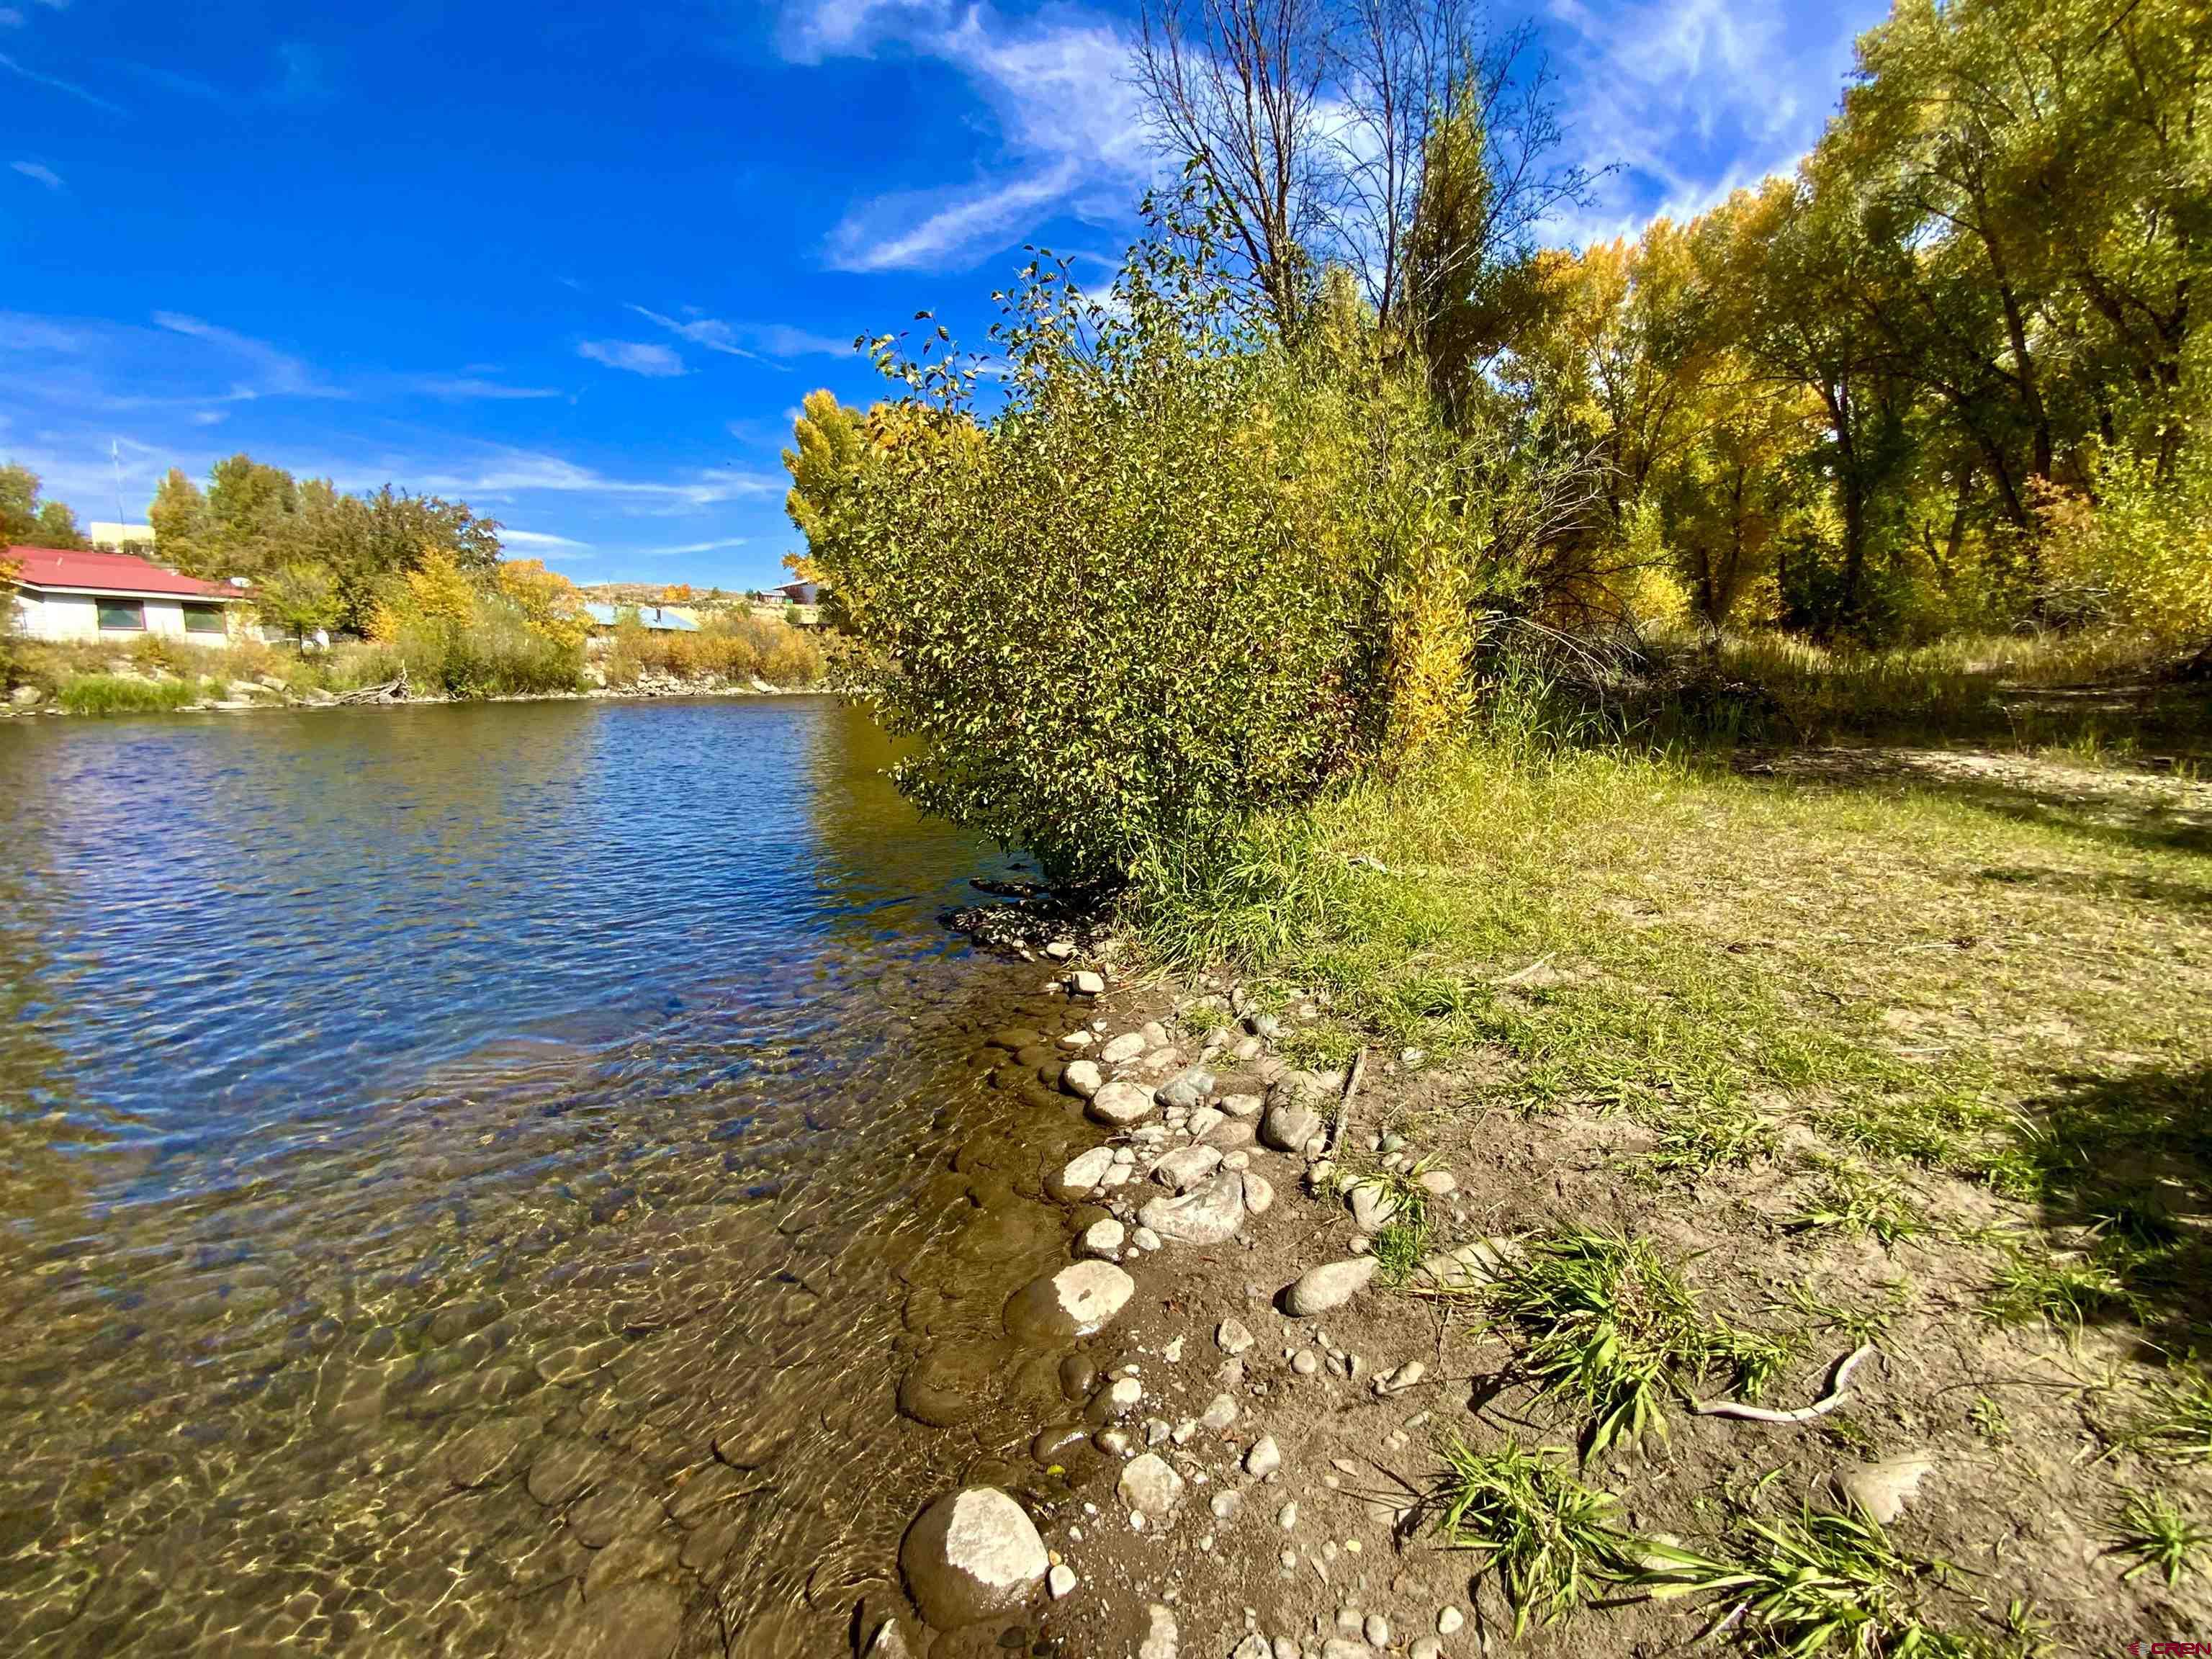 Waterfront building site to build your new home!  Great opportunity to own on the Gunnison River, hidden between the trees & close to the White Water Park. Two lots totaling 1.798 acres available. Enter through Dos Rios 1 between the 1st & 2nd houses on the right. Property is not in the Dos Rios subdivision, but there is an agreement to abide by Dos Rios 1 architectural control. No dues or fees. There is deeded access in place to cross HOA lands off of Rio Vista.  Only  a few river lots remain in the Gunnison Valley.  Level building site with mature trees and still close to downtown conveniences.